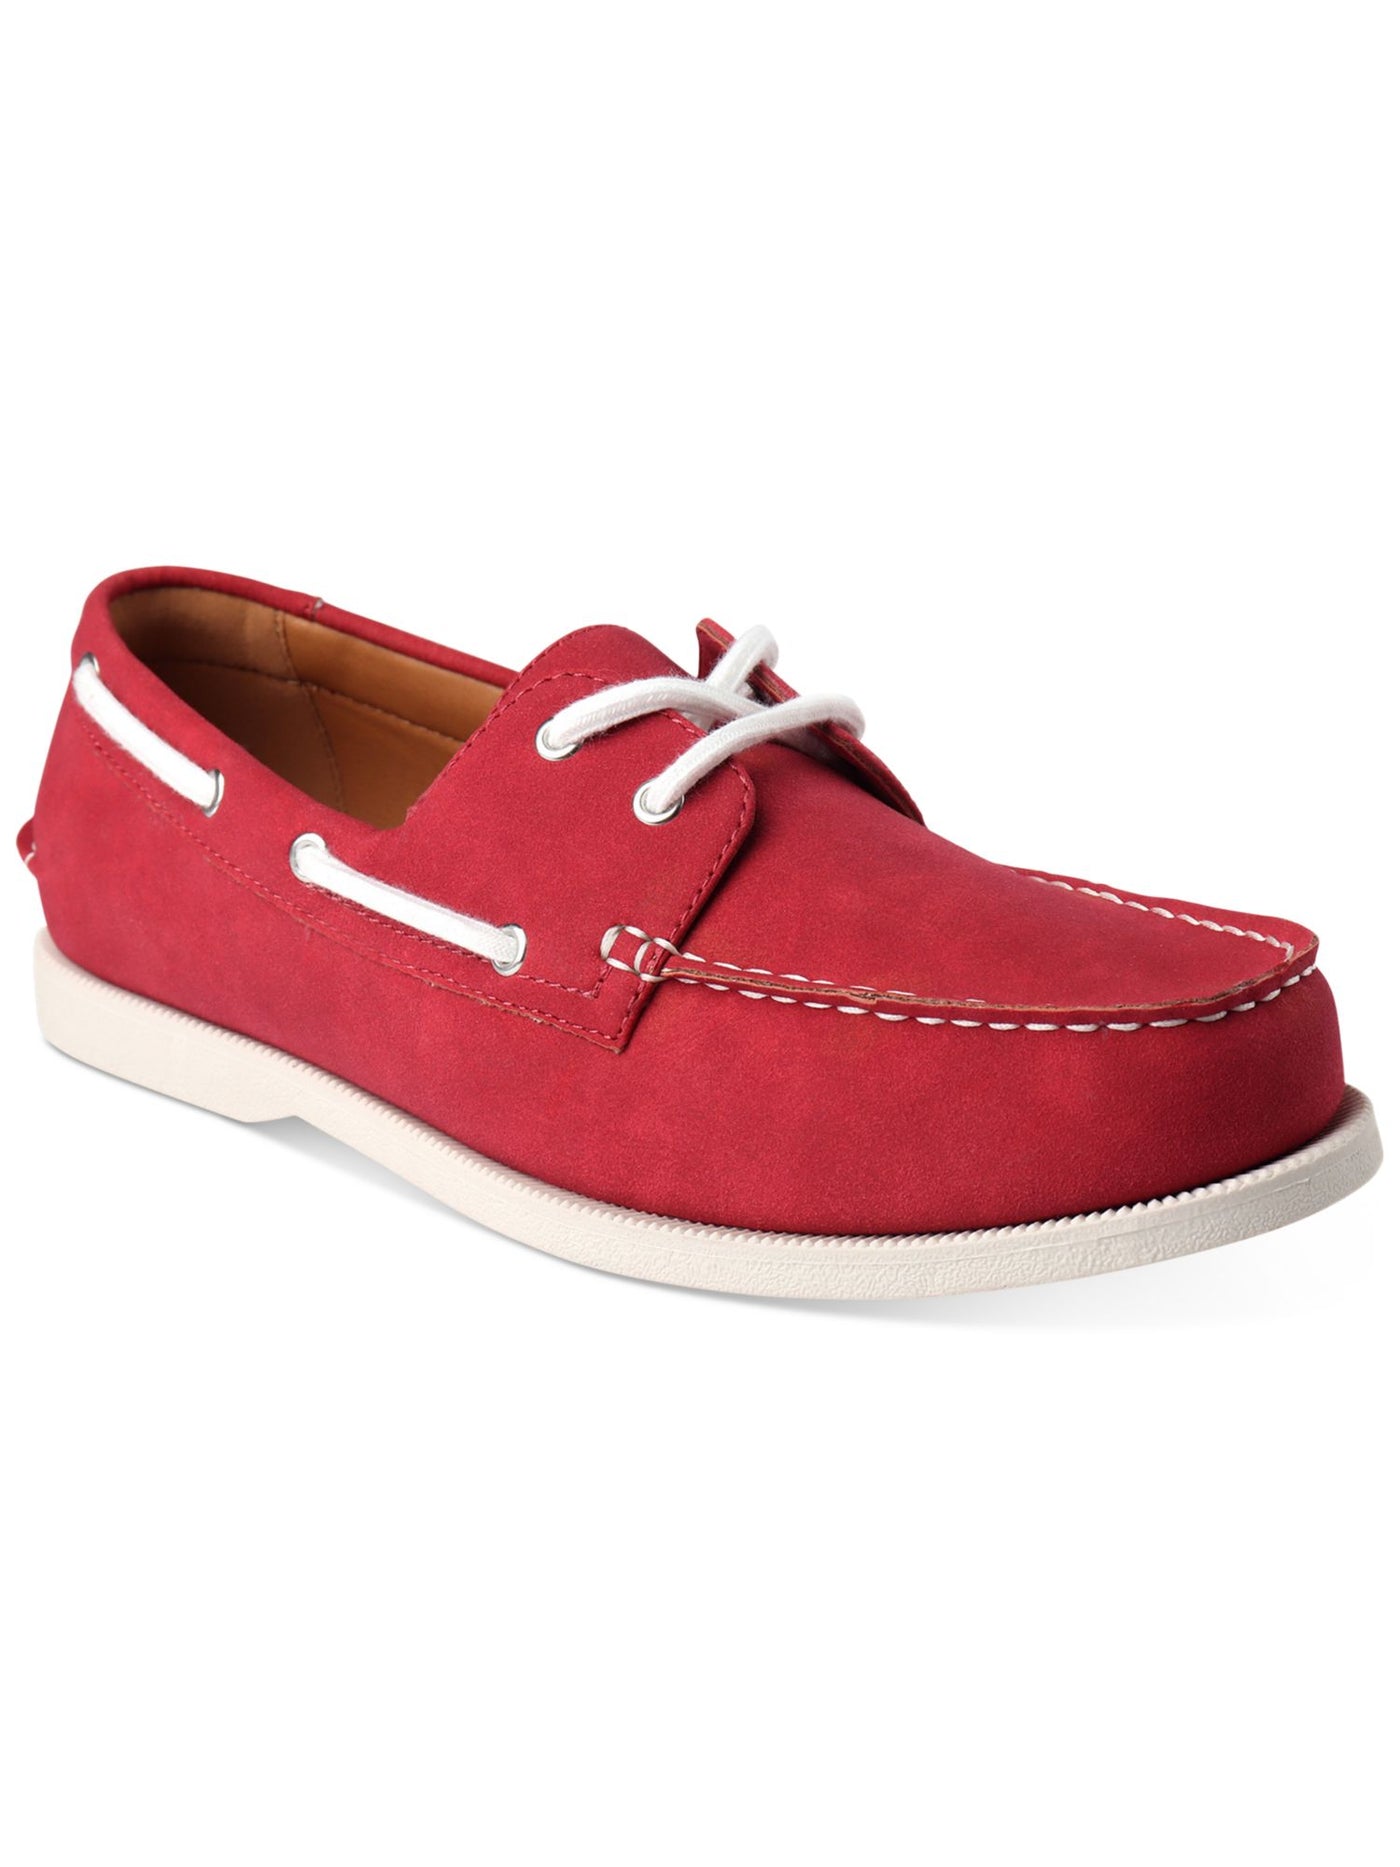 CLUBROOM Mens Red Comfort Elliot Round Toe Lace-Up Boat Shoes 9.5 M